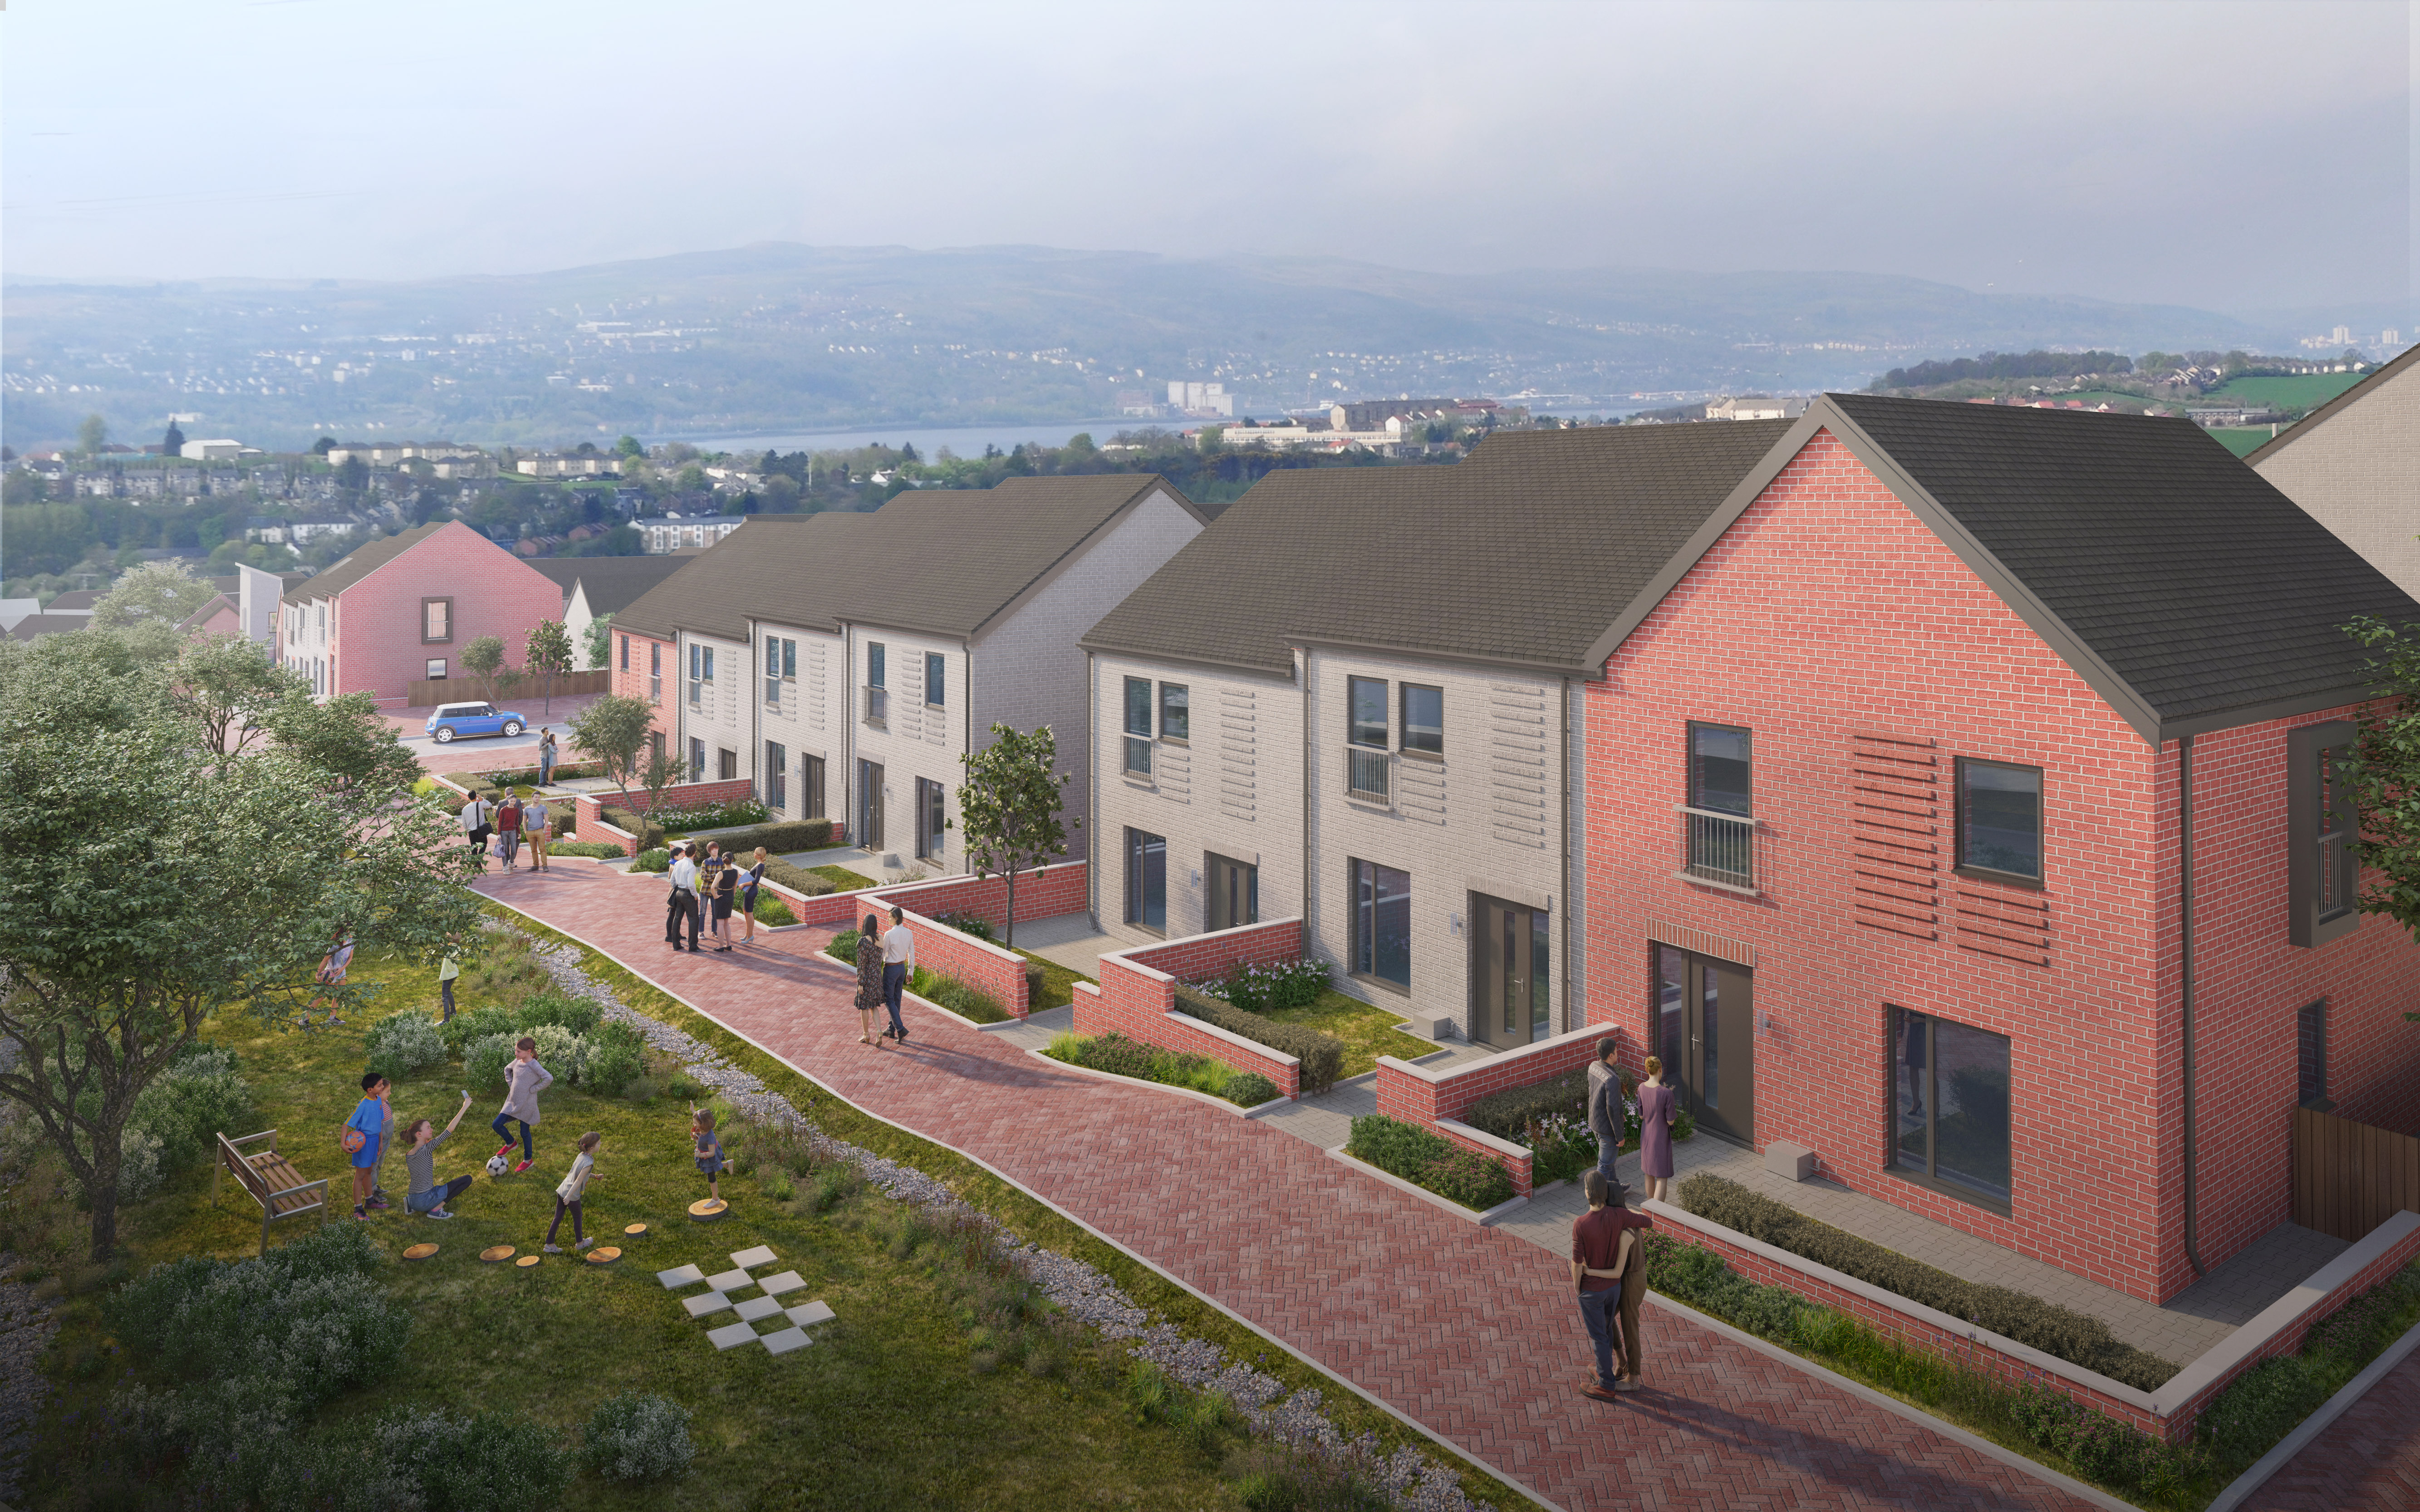 Caledonia Housing Association submits plans for 140 affordable homes